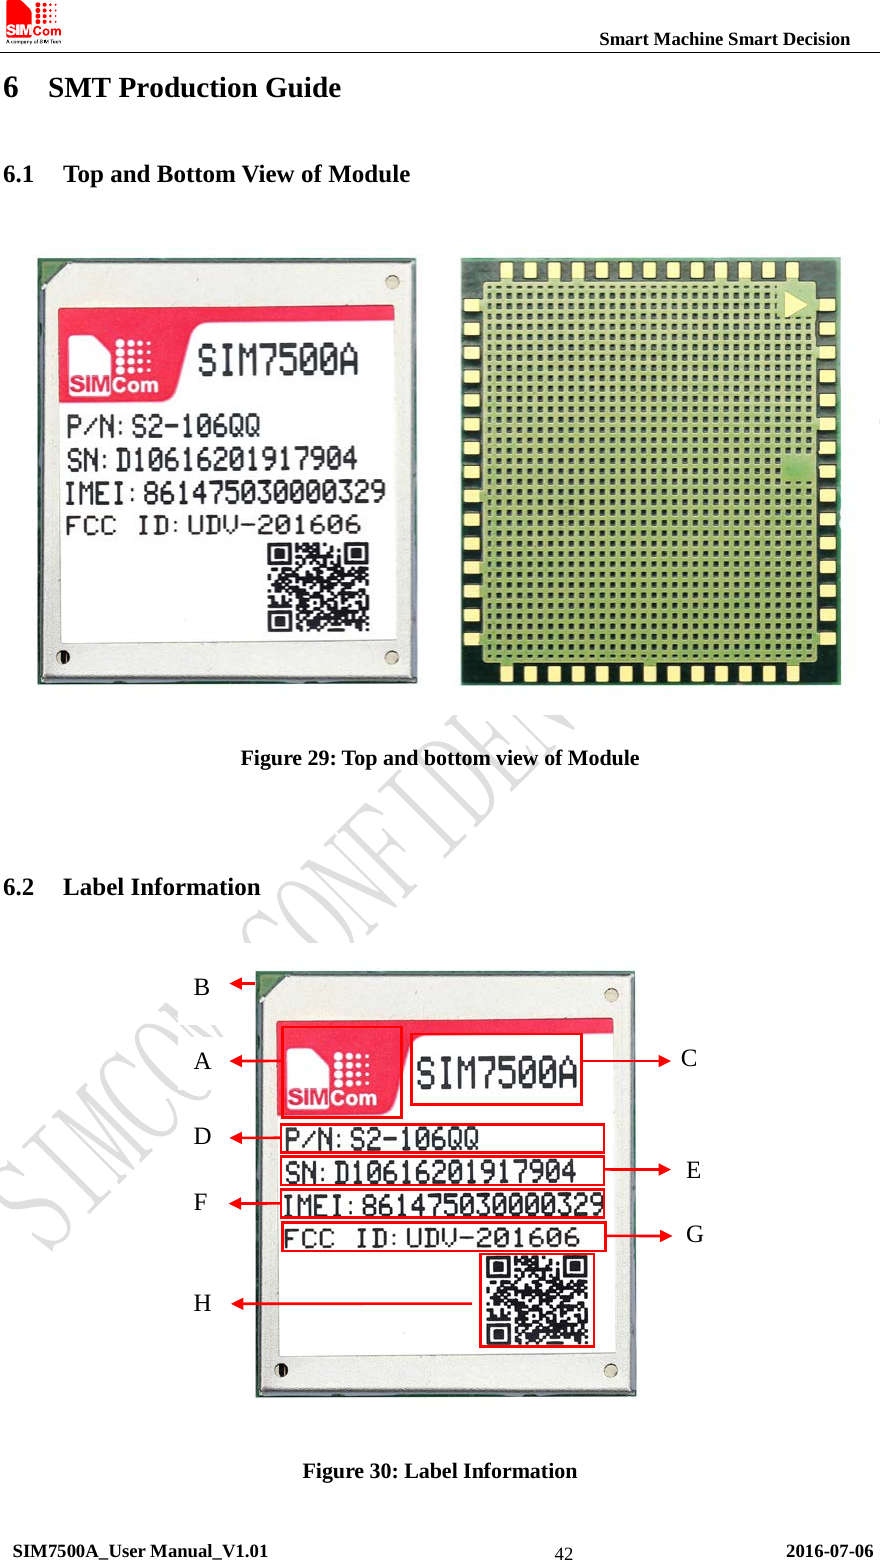                                                          Smart Machine Smart Decision 6 SMT Production Guide 6.1 Top and Bottom View of Module  Figure 29: Top and bottom view of Module  6.2 Label Information  Figure 30: Label Information A D F H B G C E  SIM7500A_User Manual_V1.01                                                       2016-07-06 42 